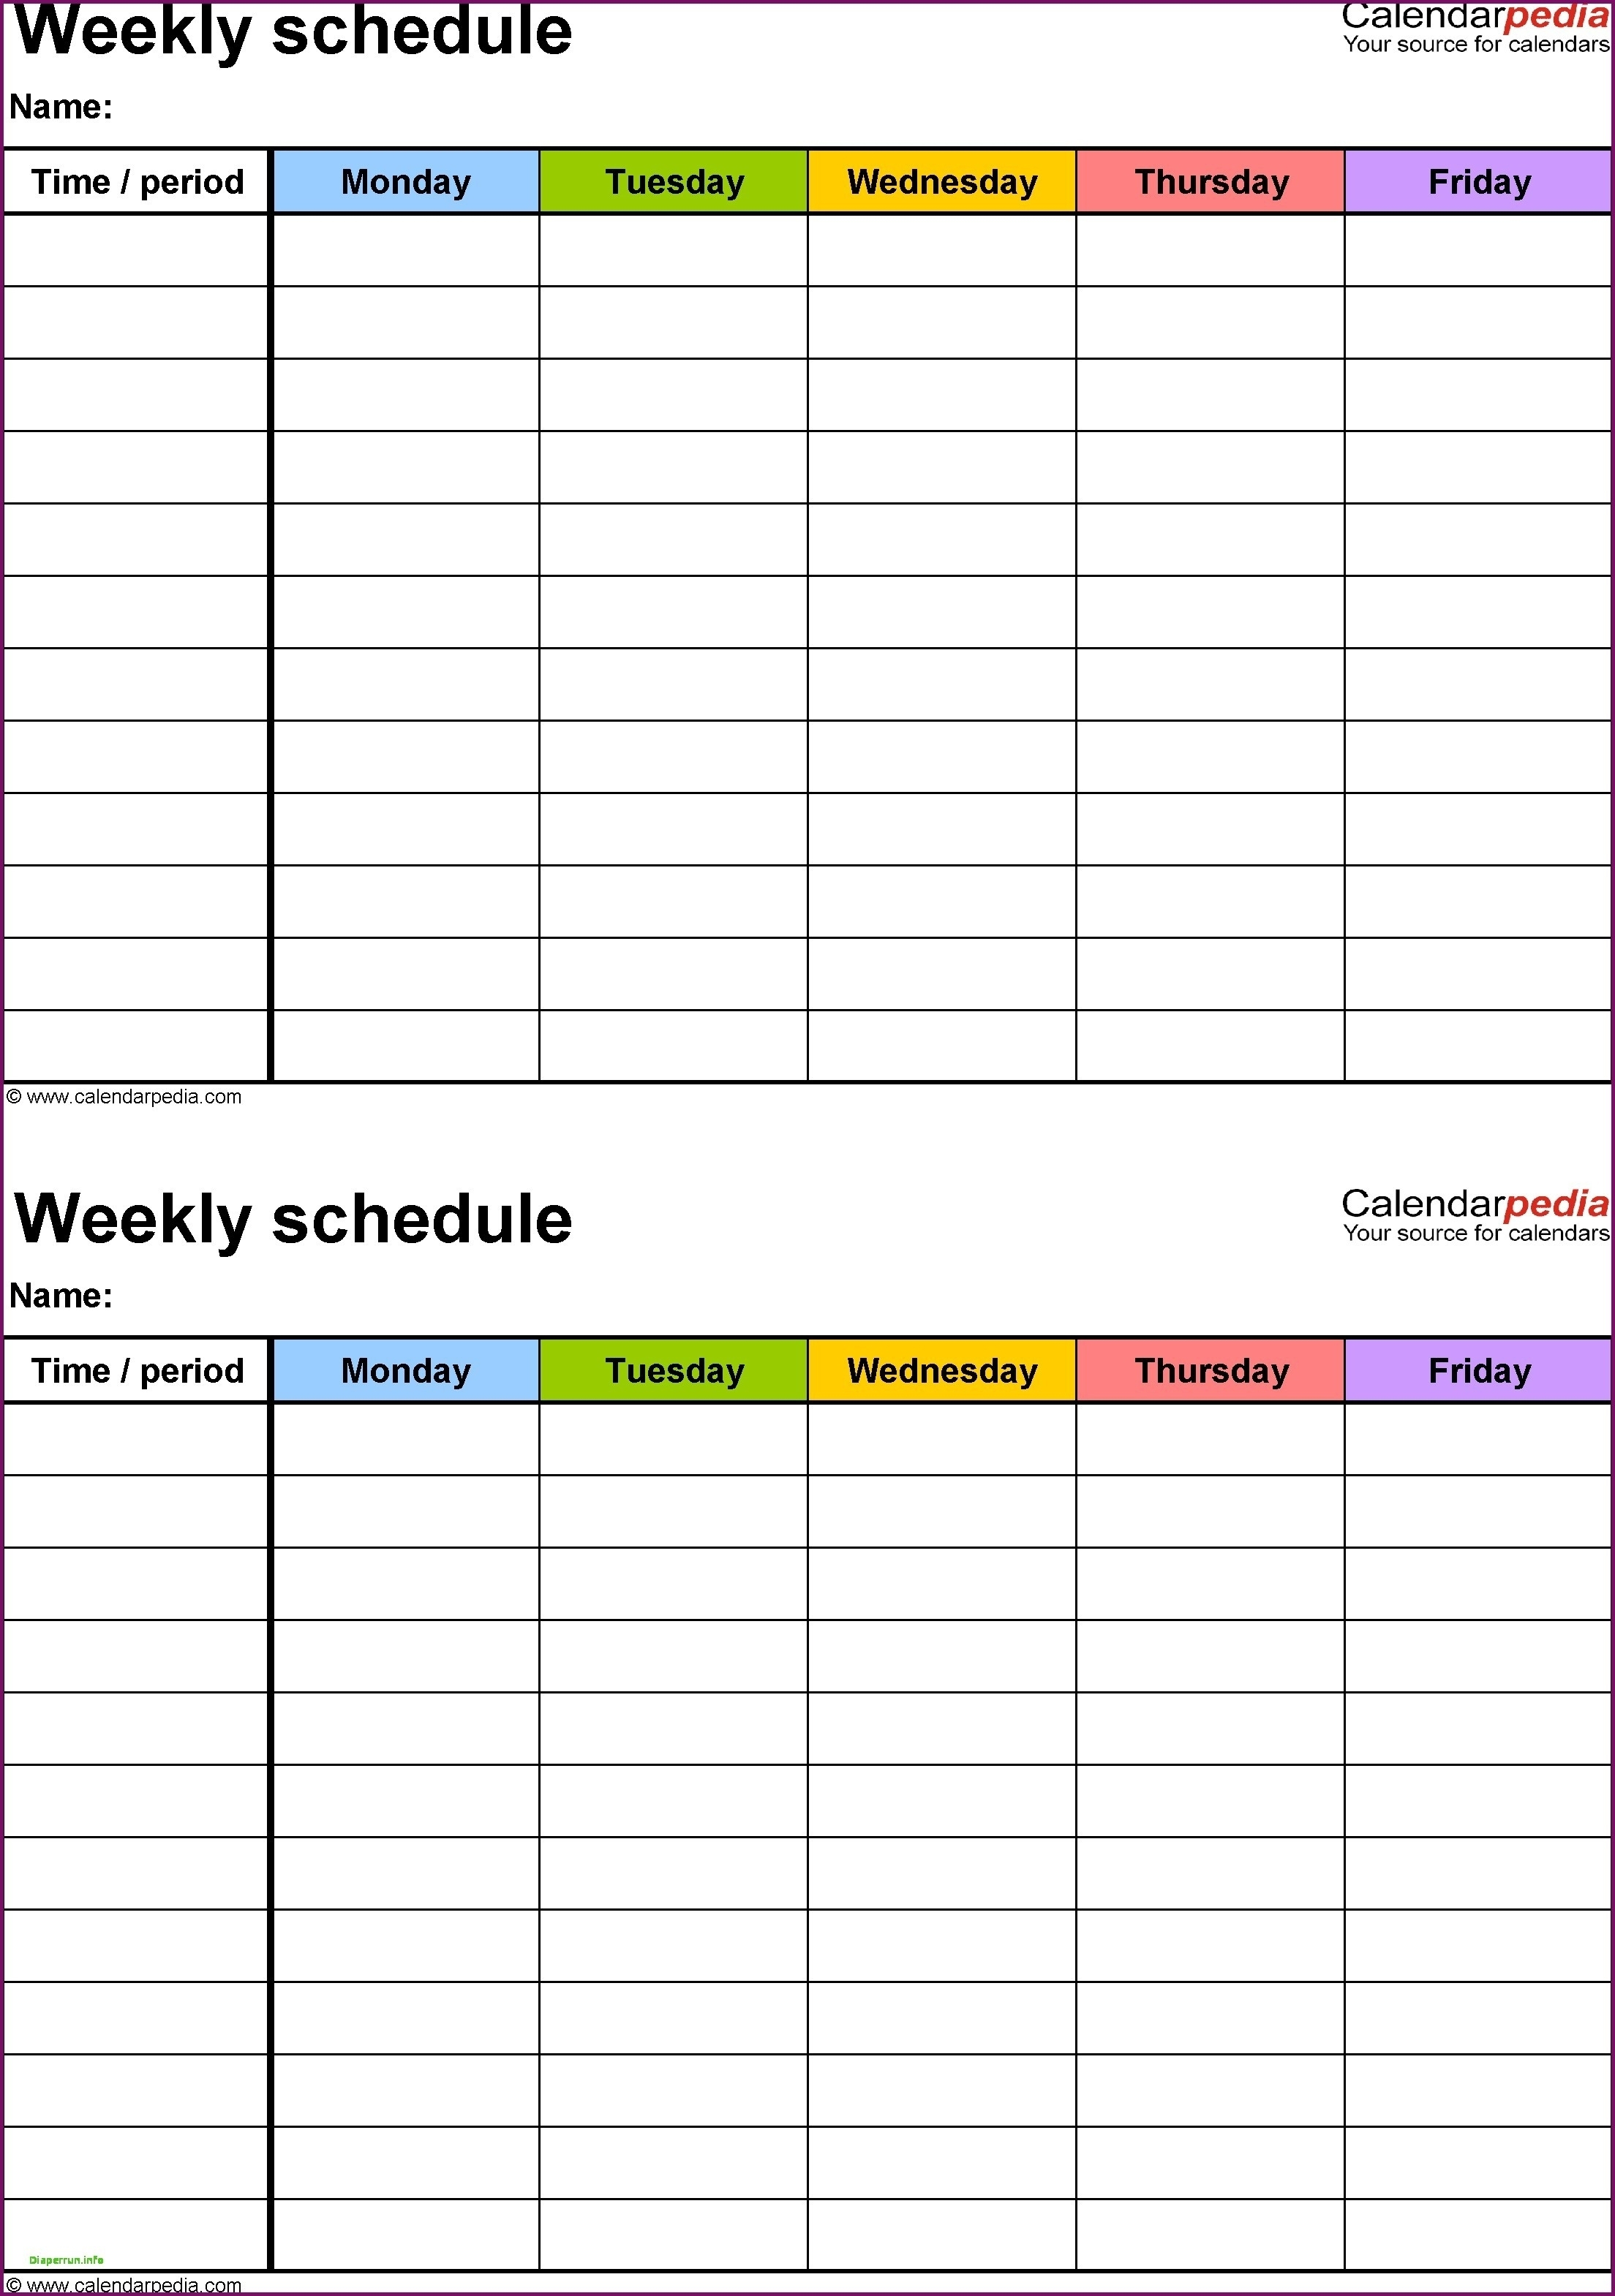 12 Hour Shift Schedule Template | Calendar Printing Example